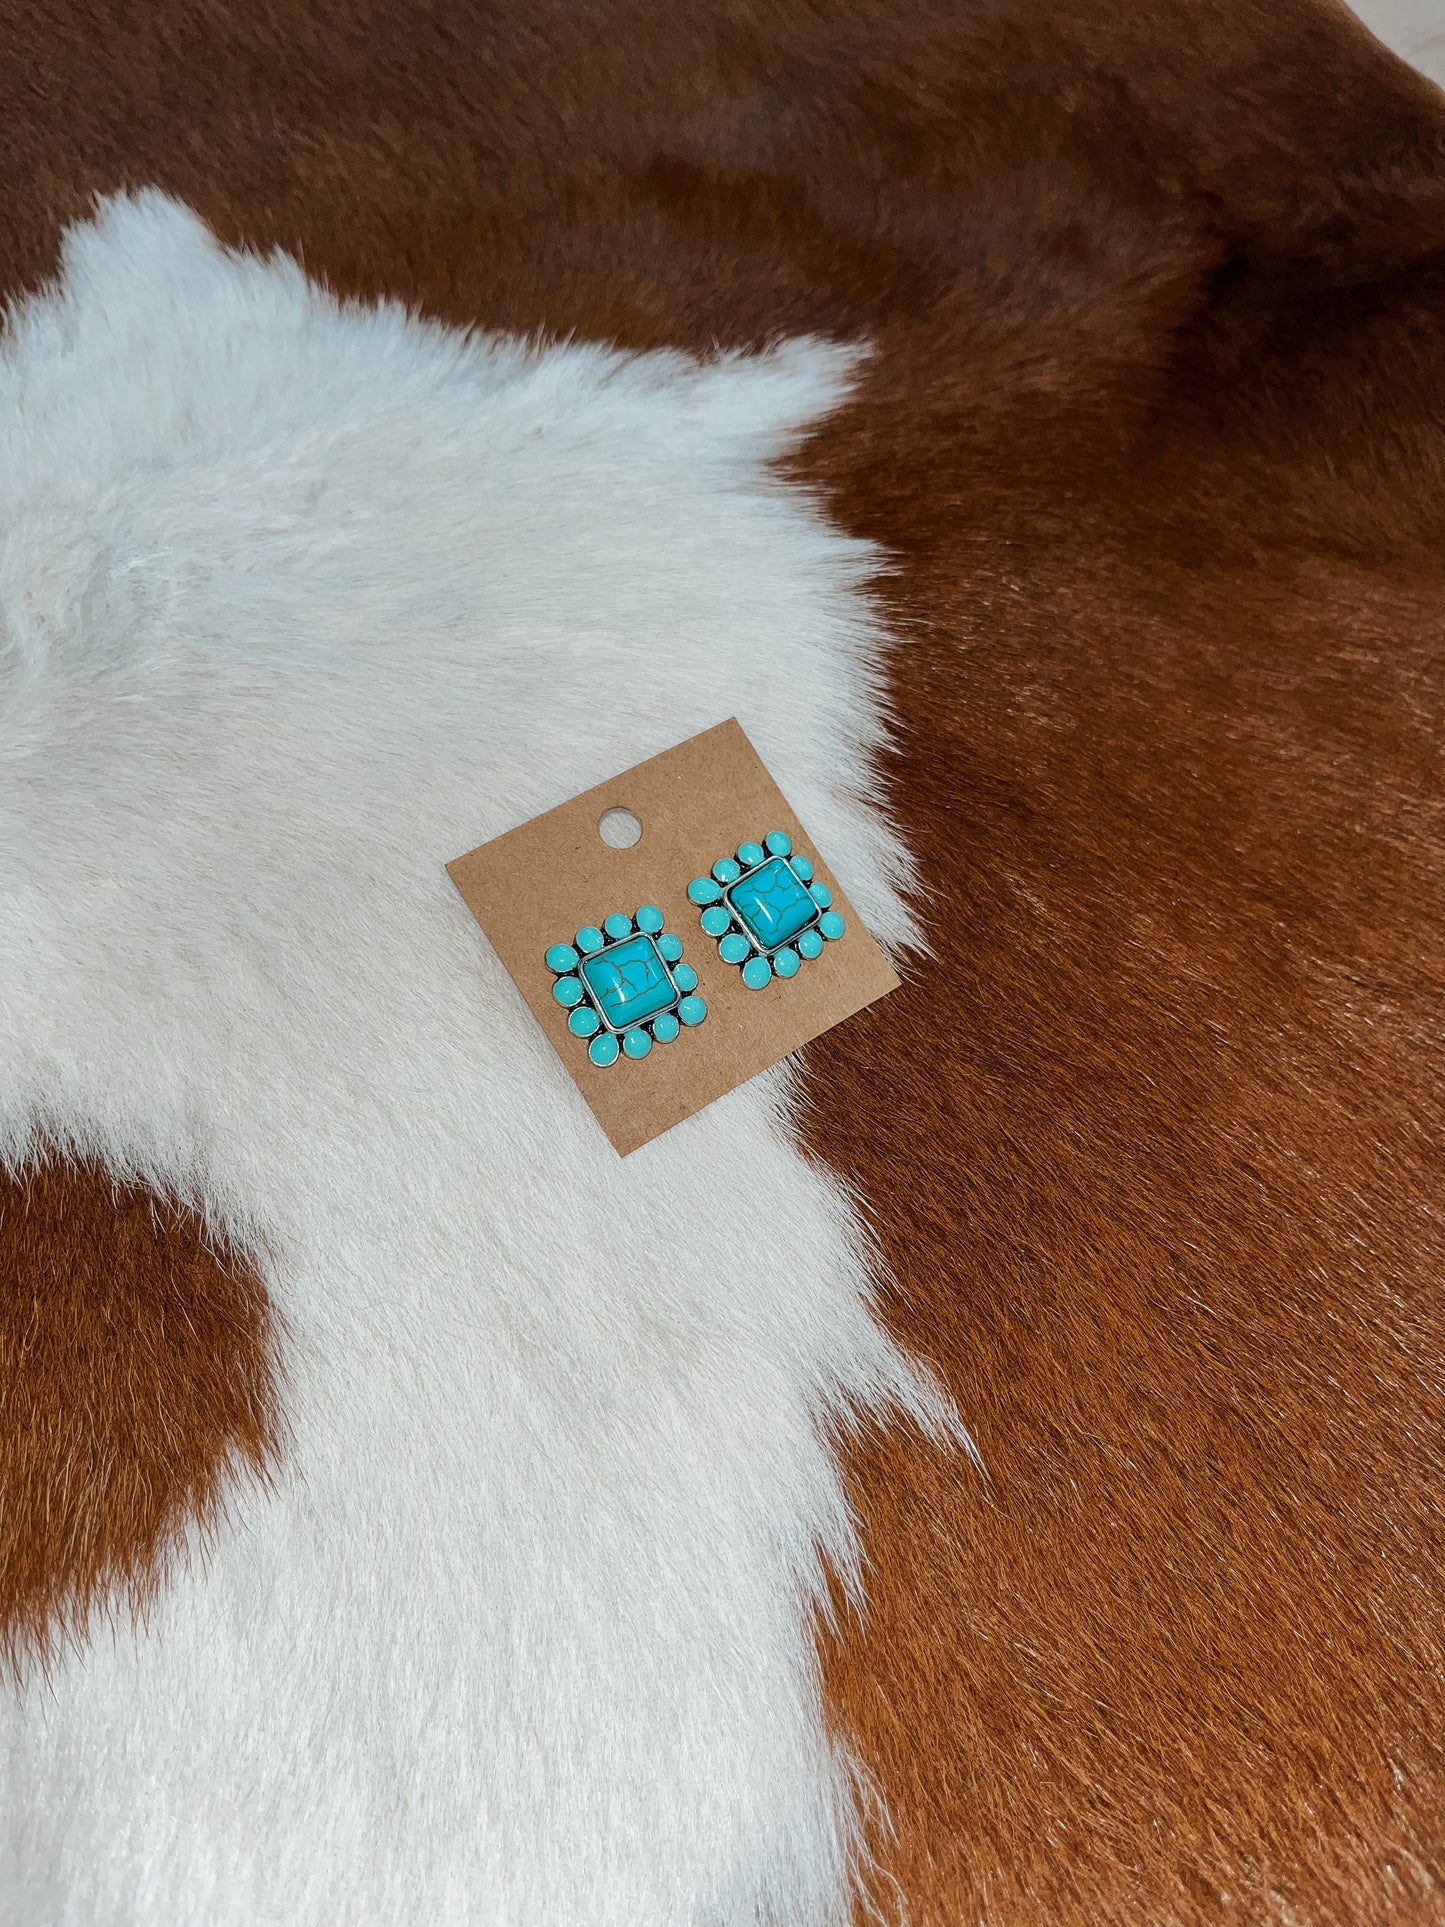 The Turquoise Square Earrings